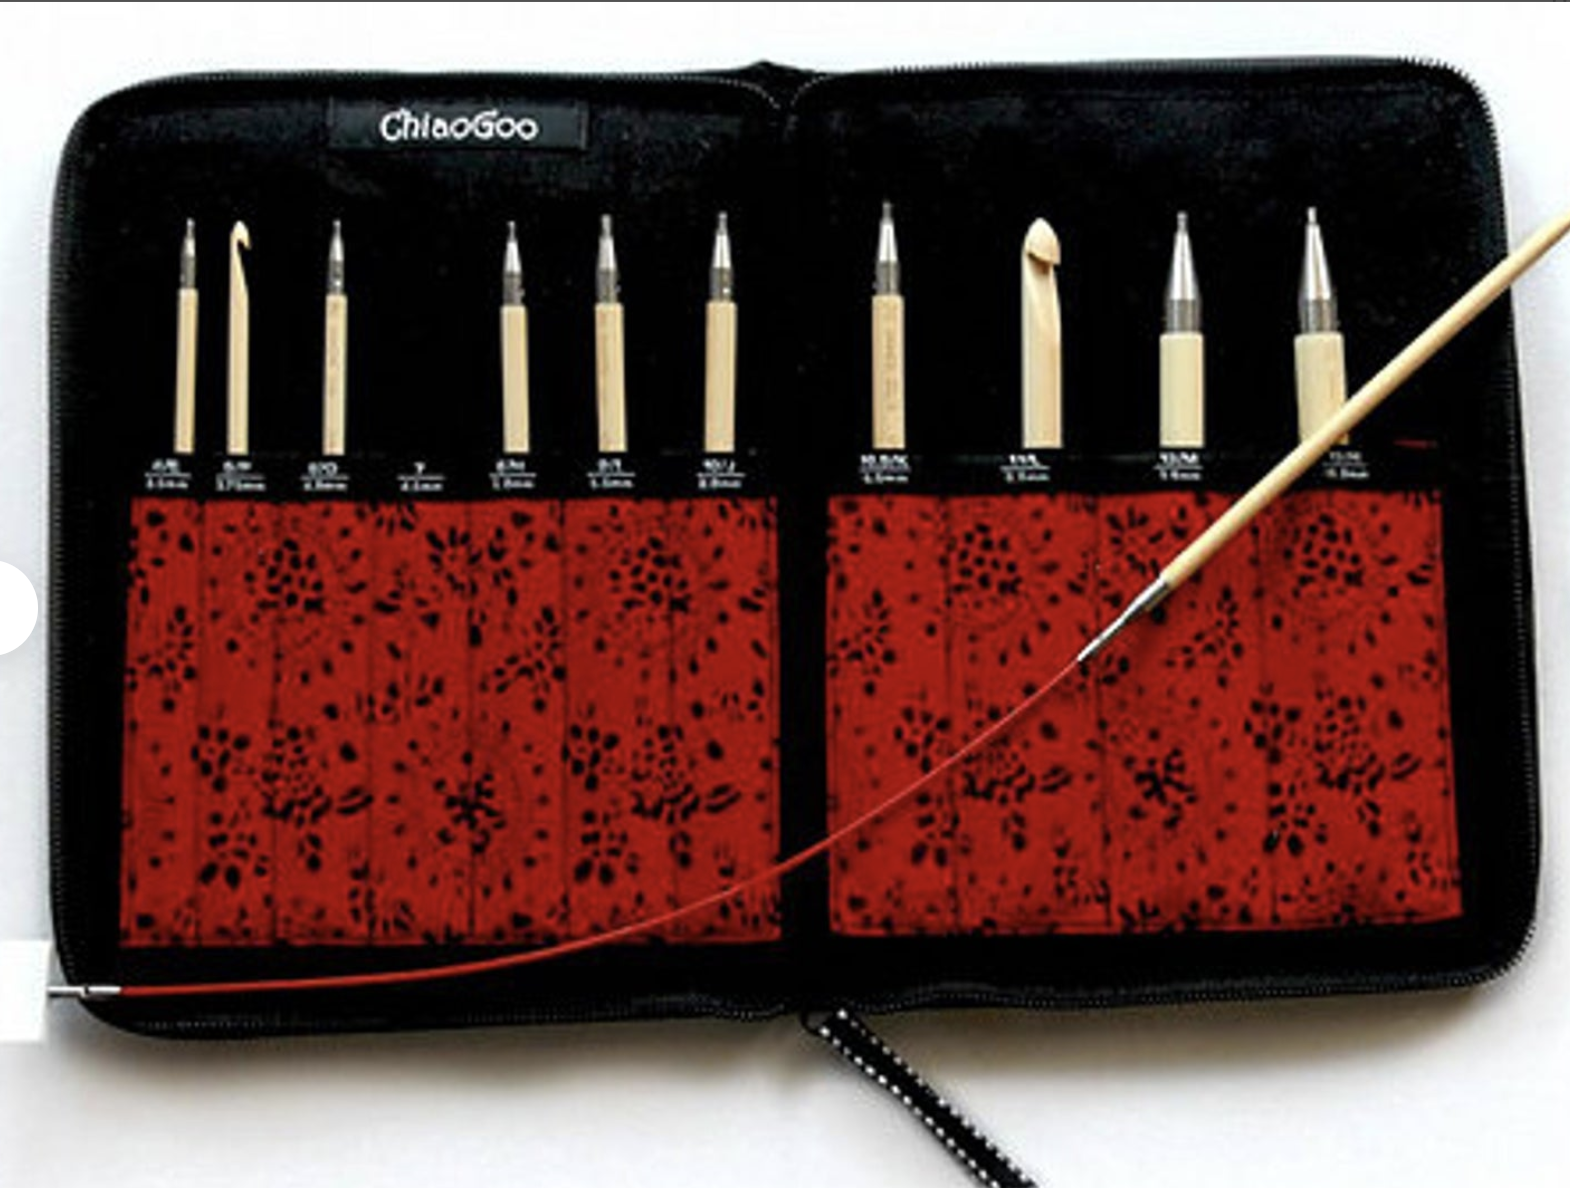 Best Tunisian crochet hooks for every kind of project - Gathered